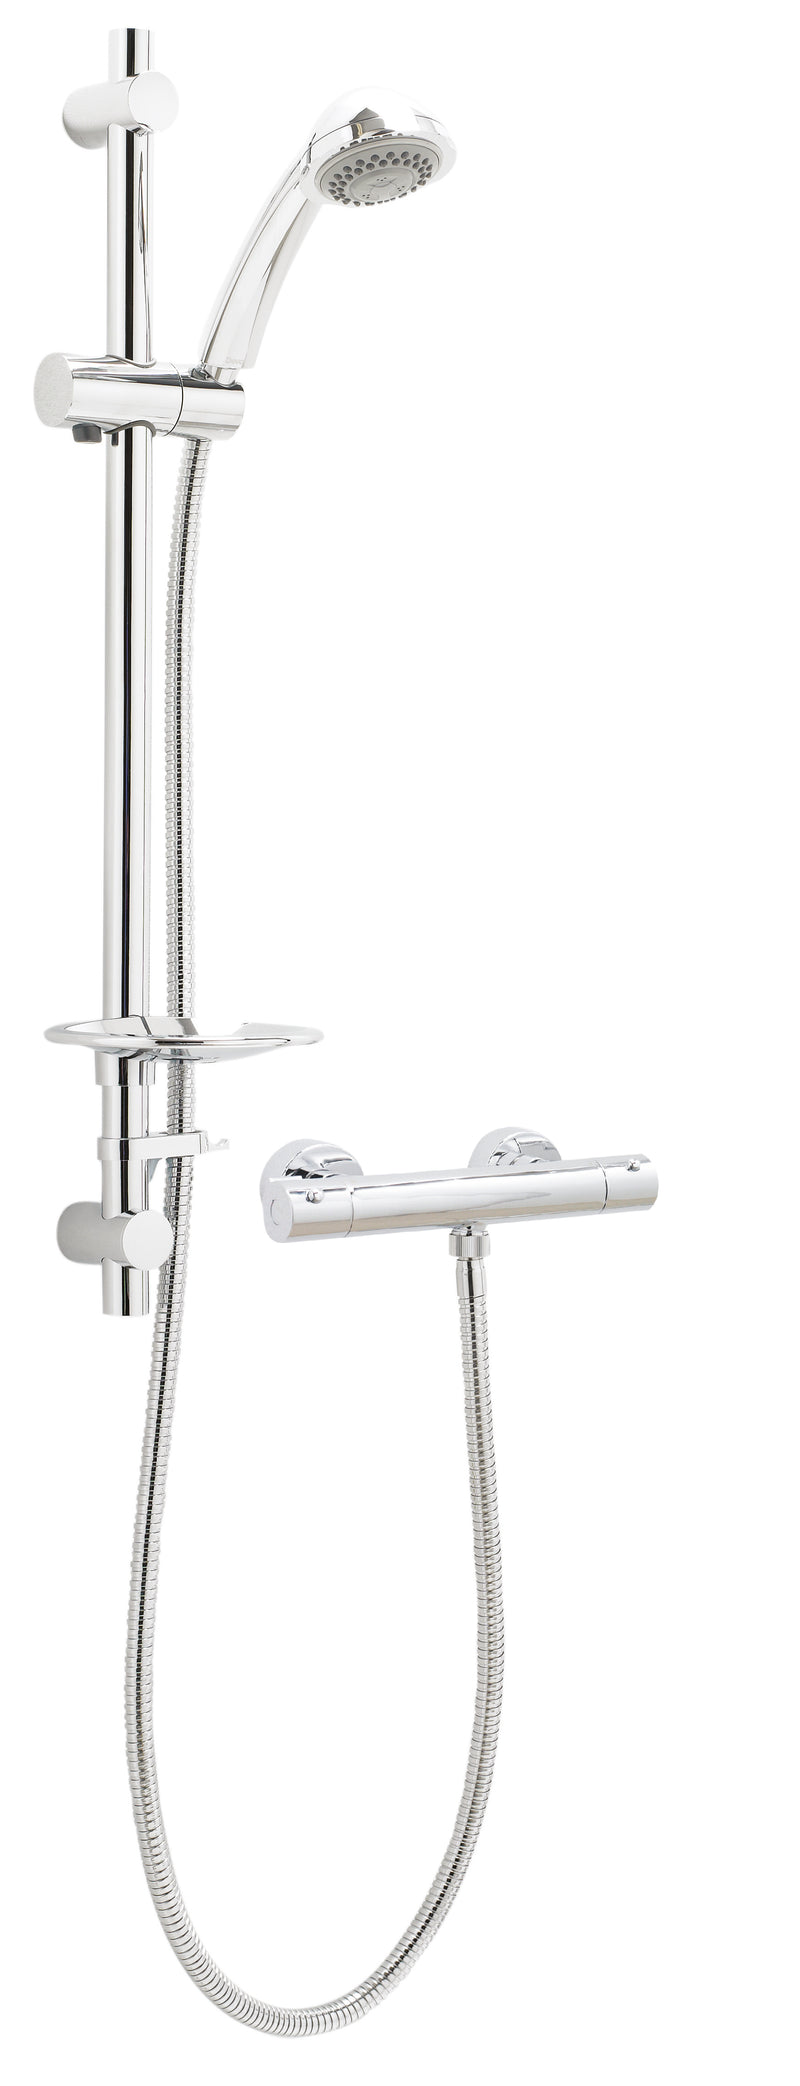 COMBI BAR SHOWER WITH MULTI MODE KIT